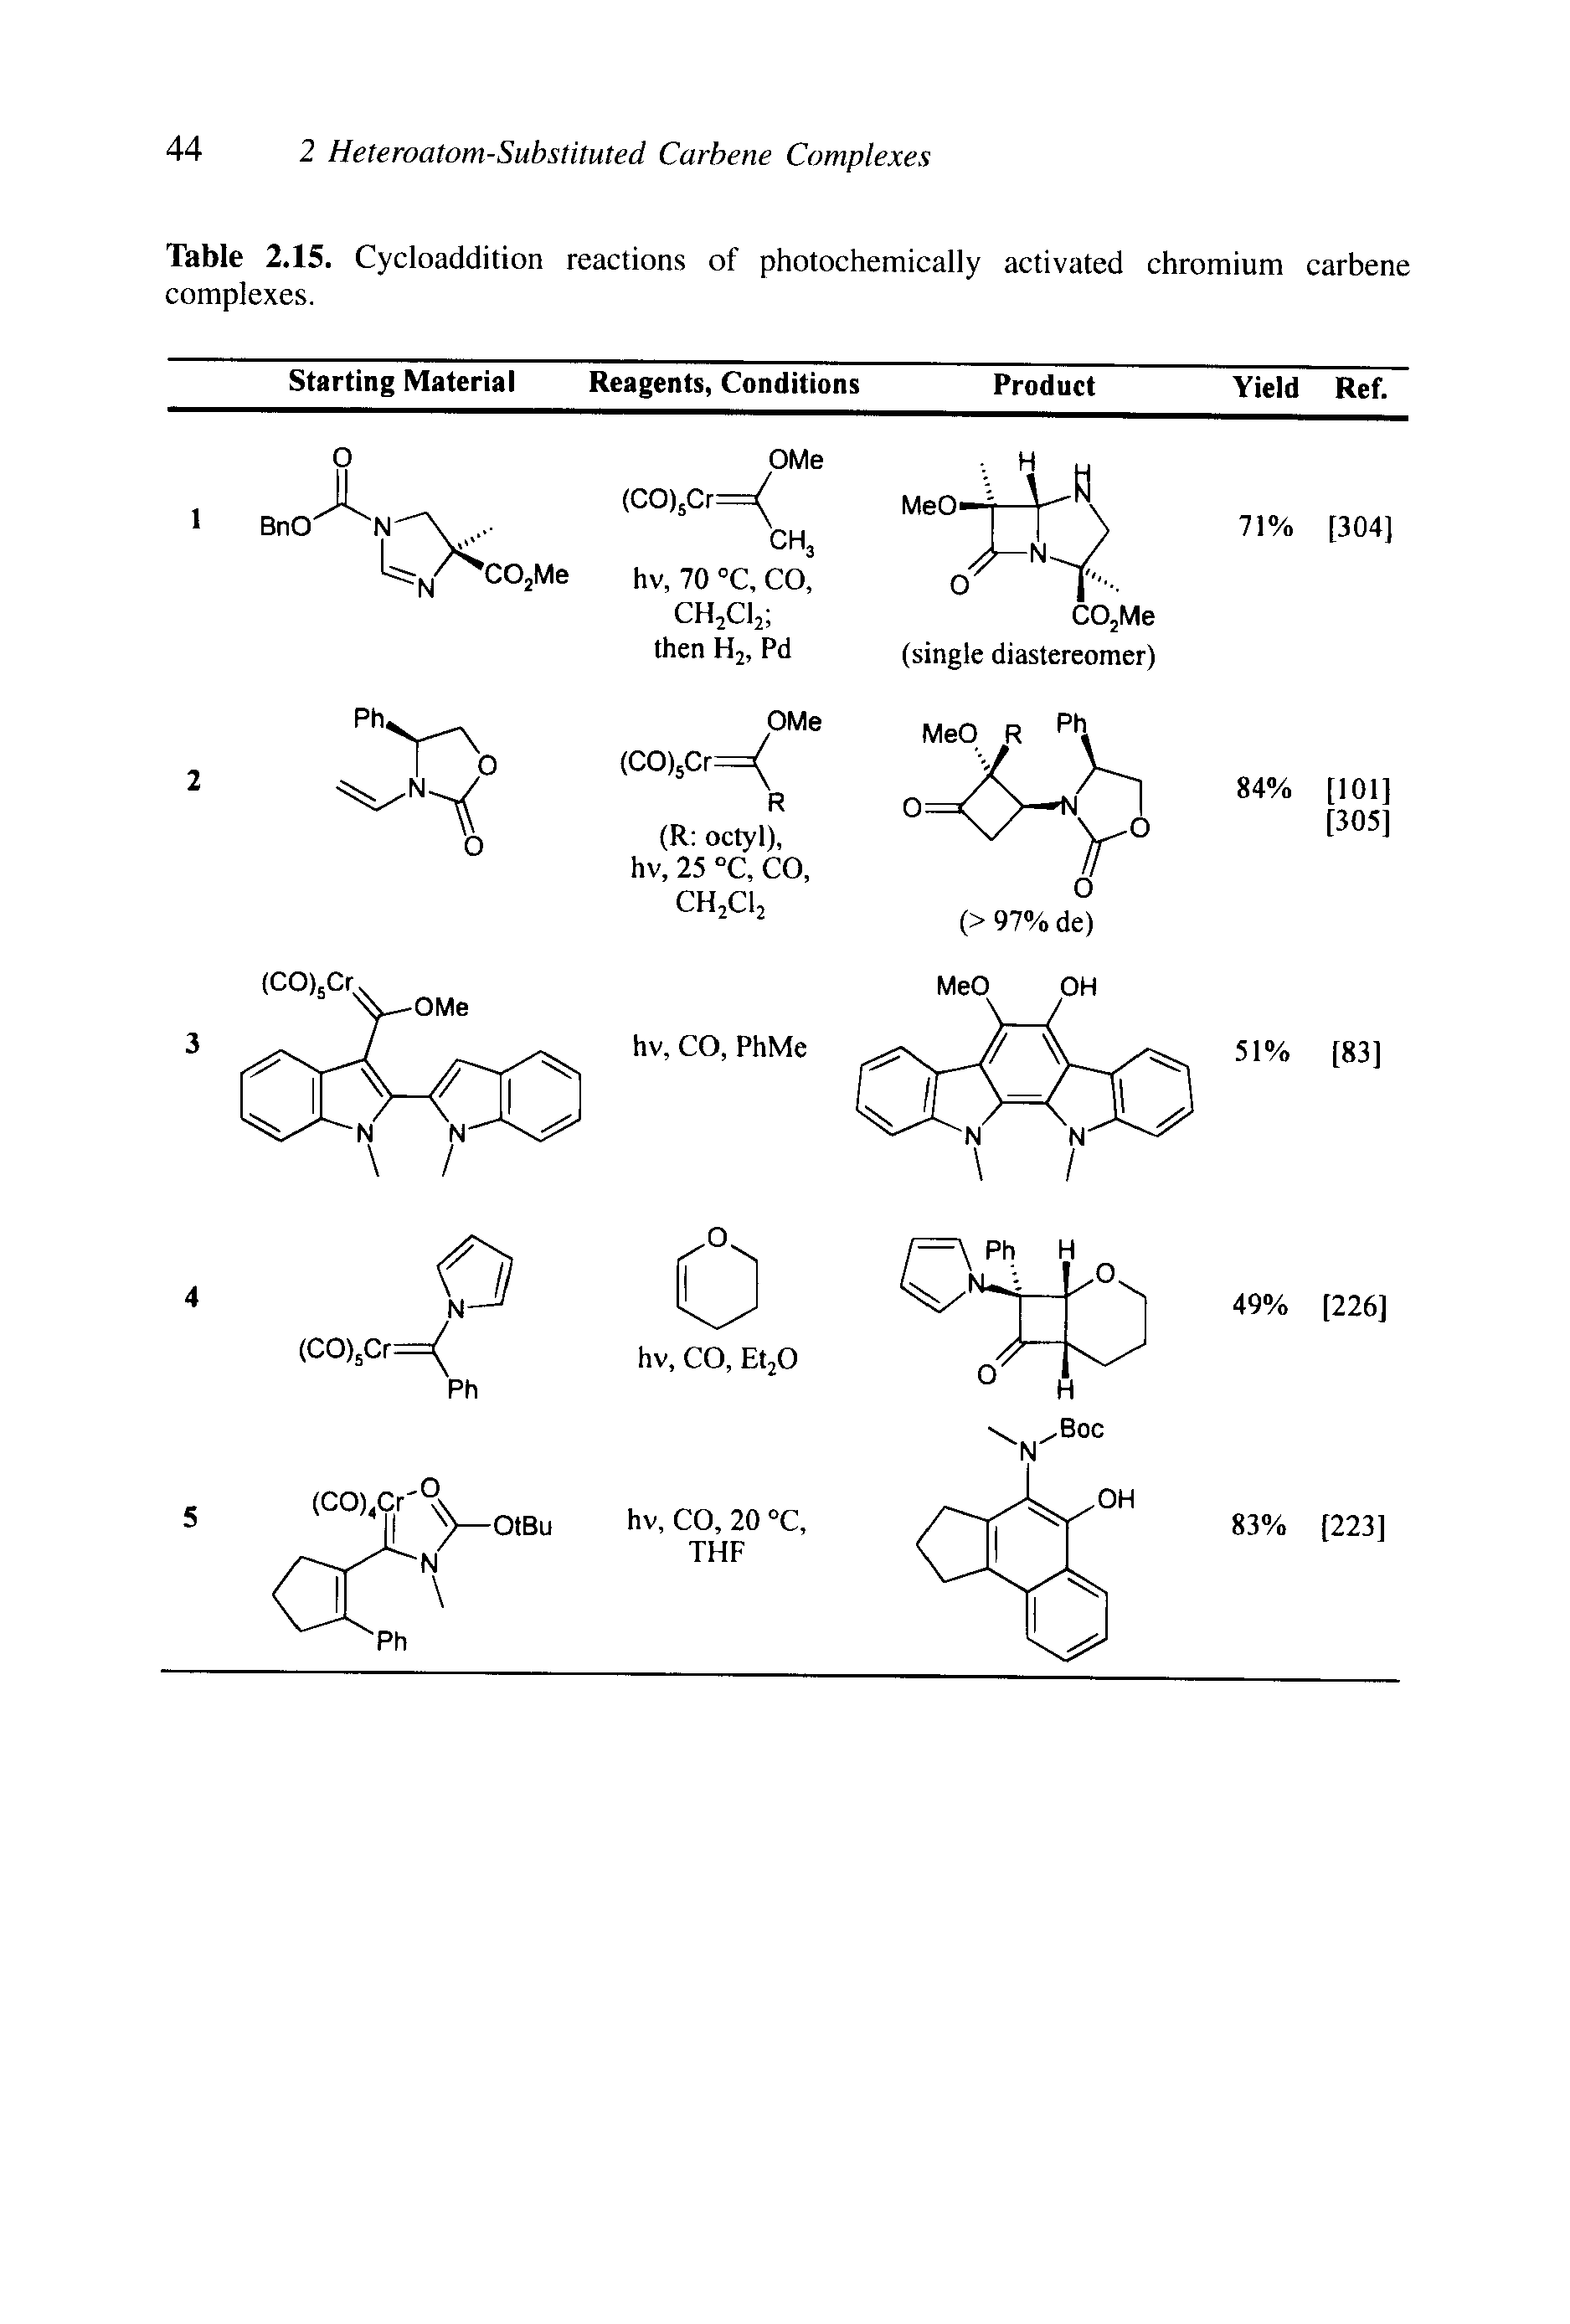 Table 2.15. Cycloaddition reactions of photochemically activated chromium carbene complexes.